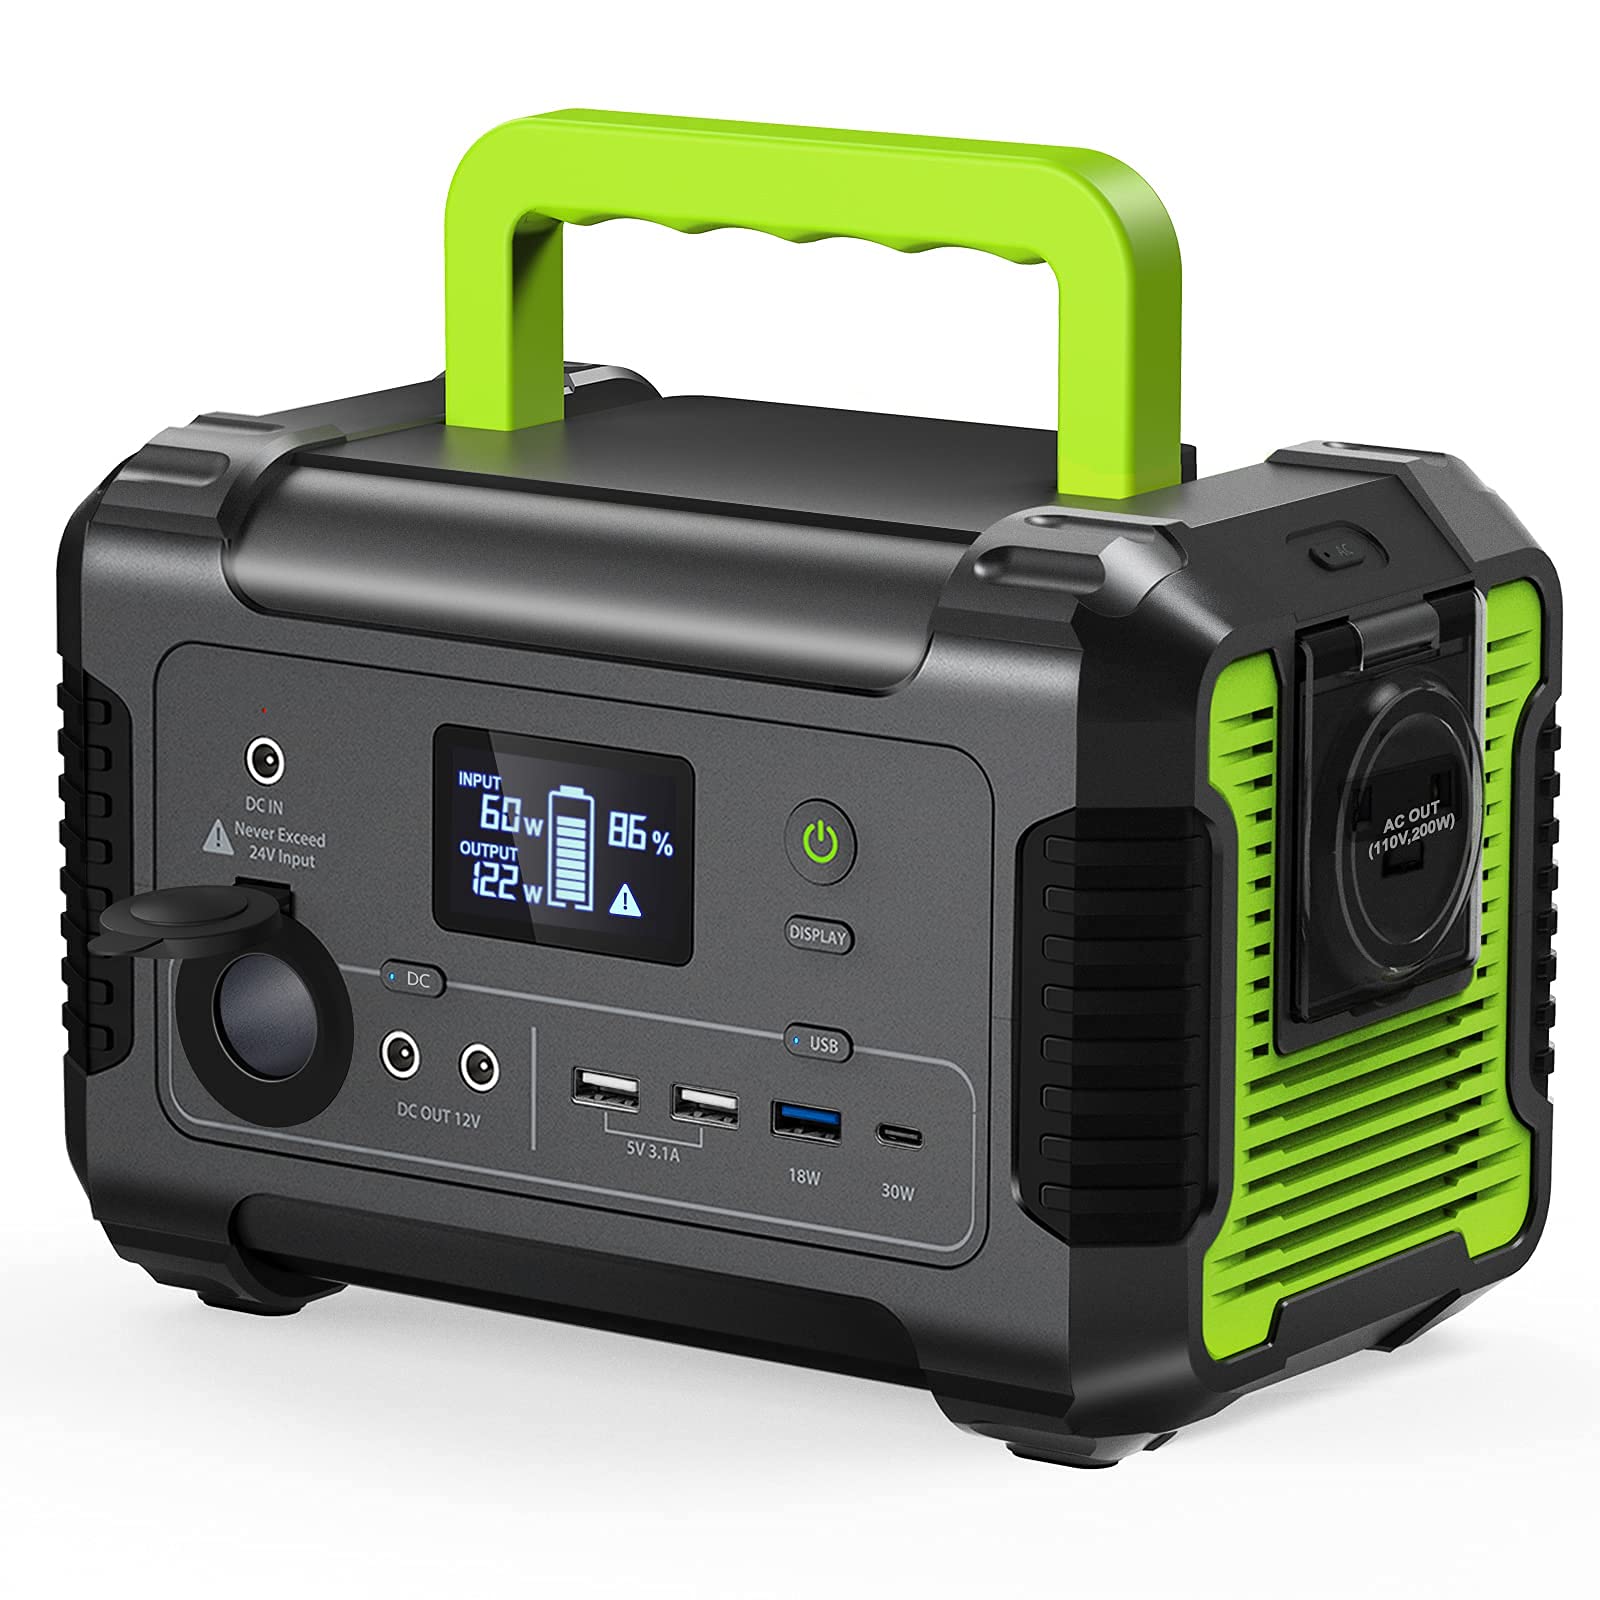 PAXCESS Portable Power Station 200W, 230Wh/62400mAh